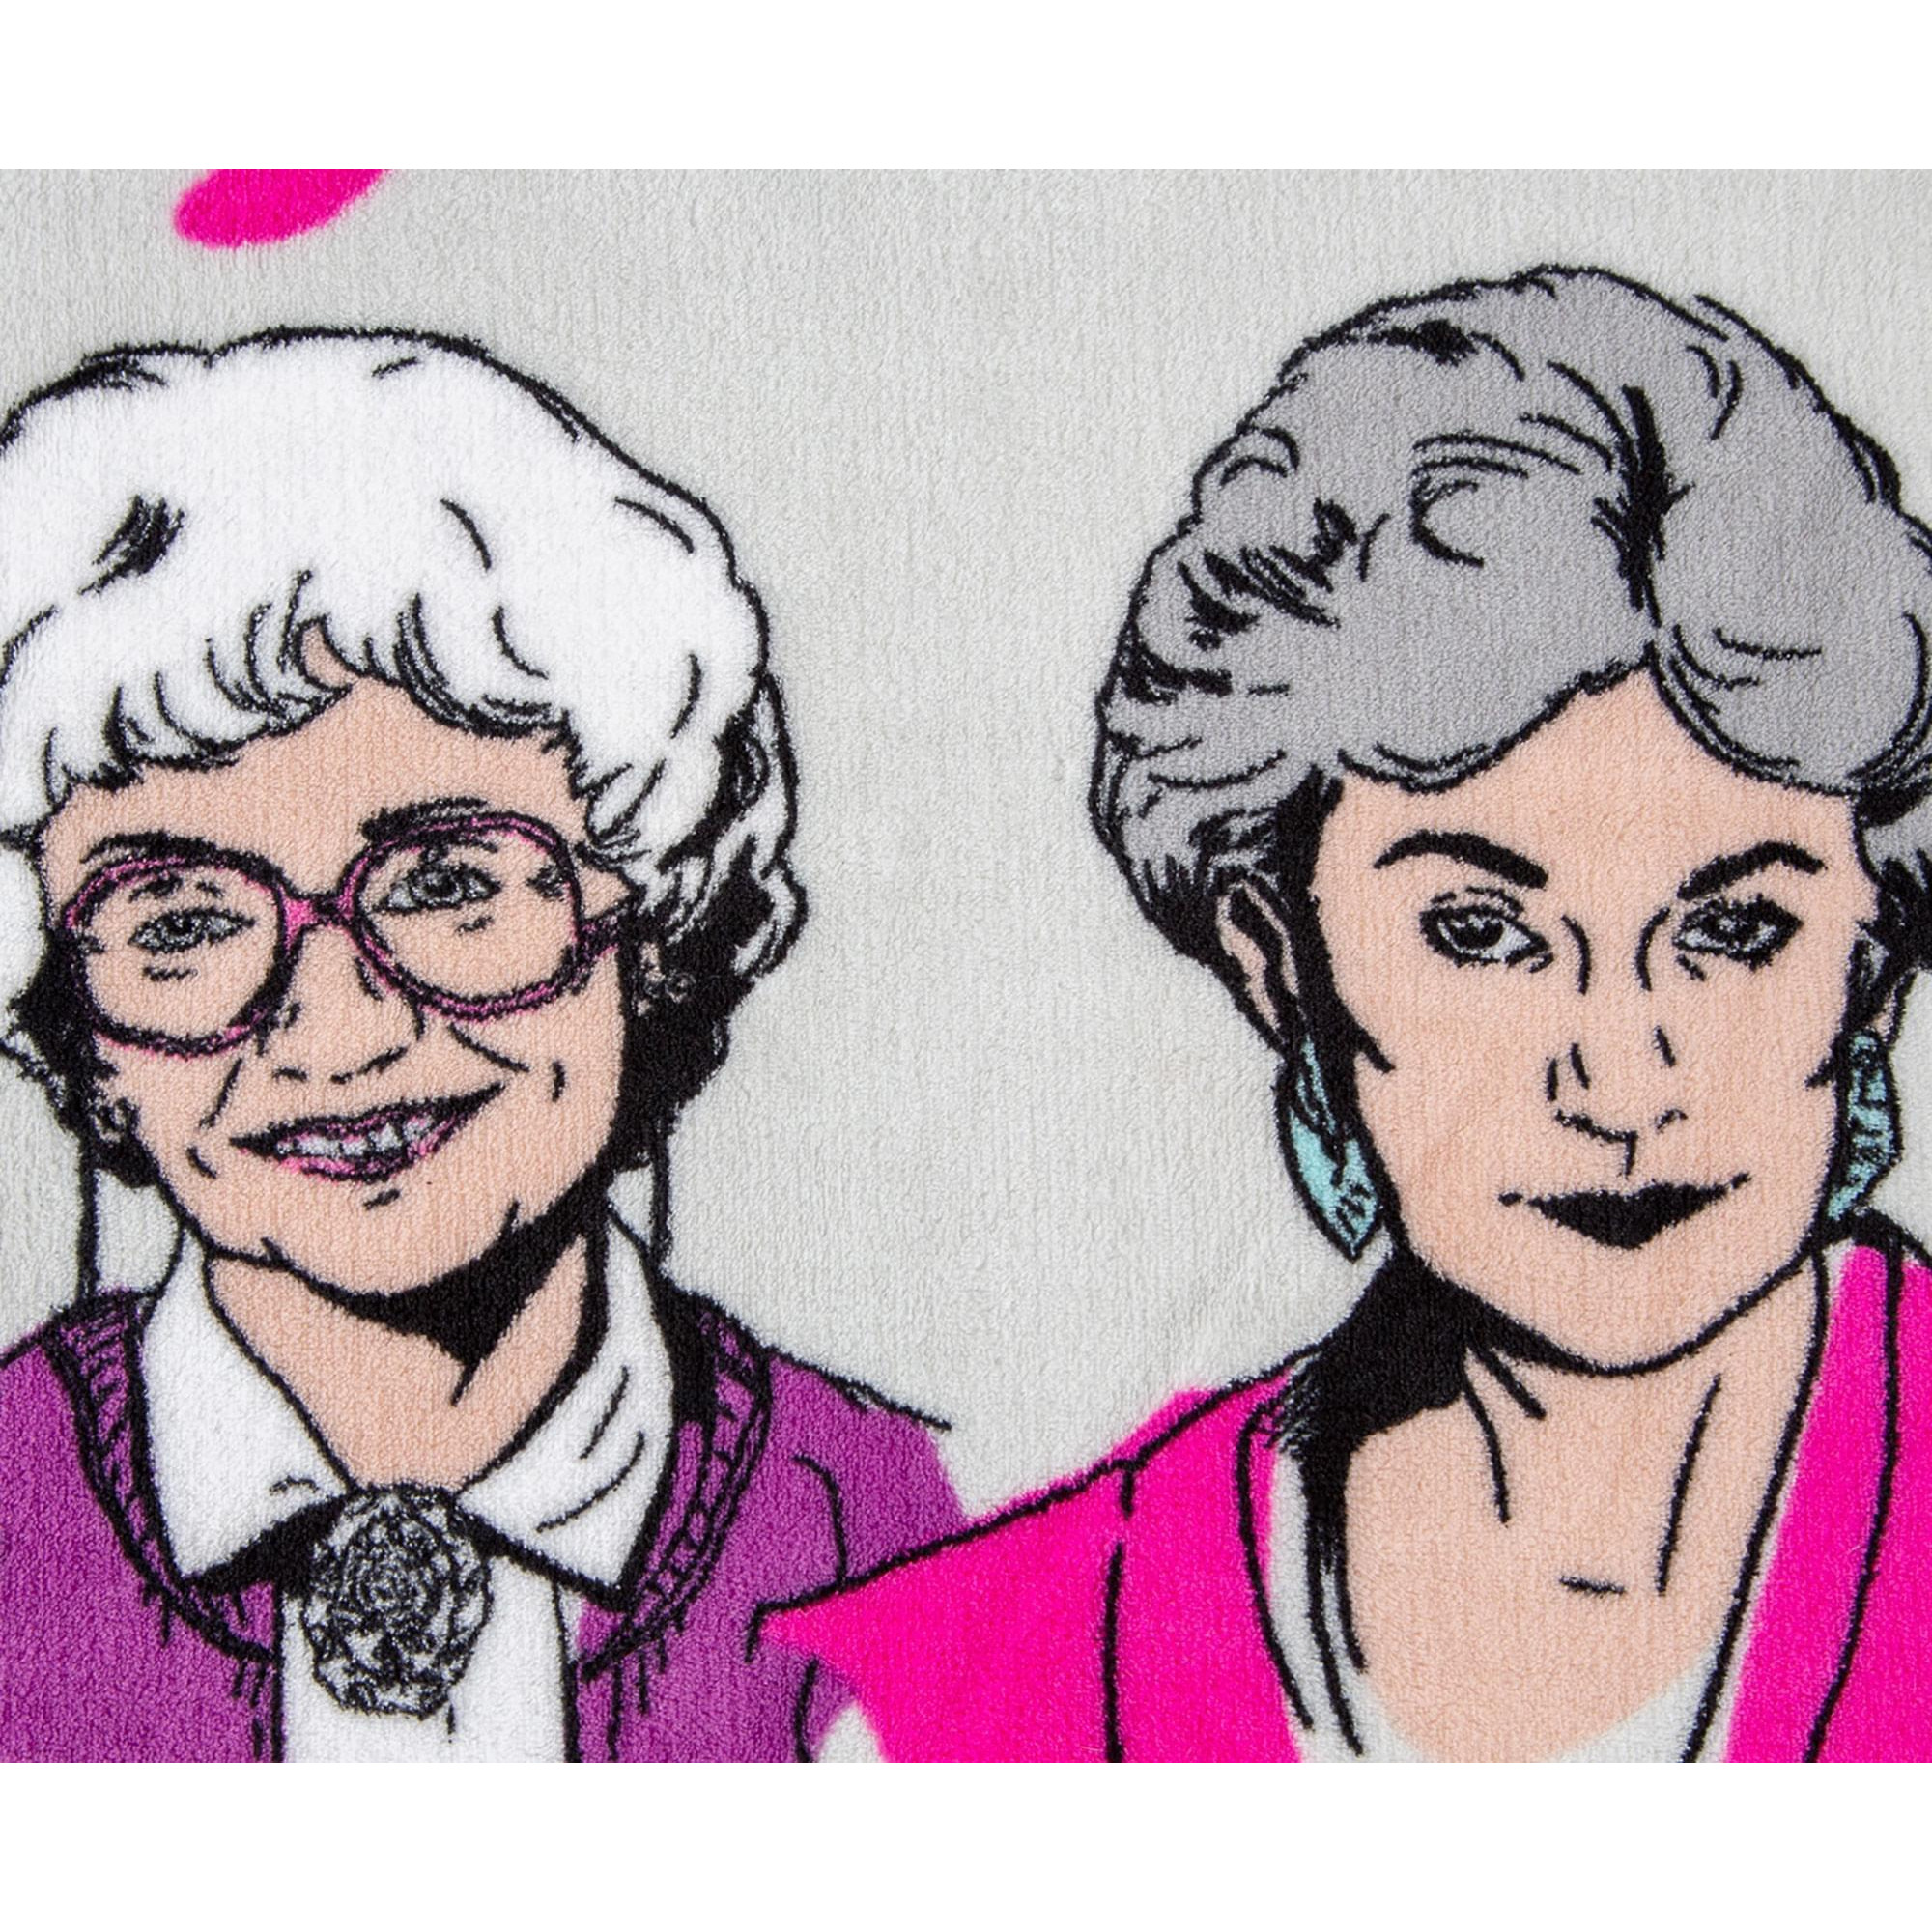 The Golden Girls "Live Like" Micro Plush Throw Blanket | 45 x 60 Inches alternate image